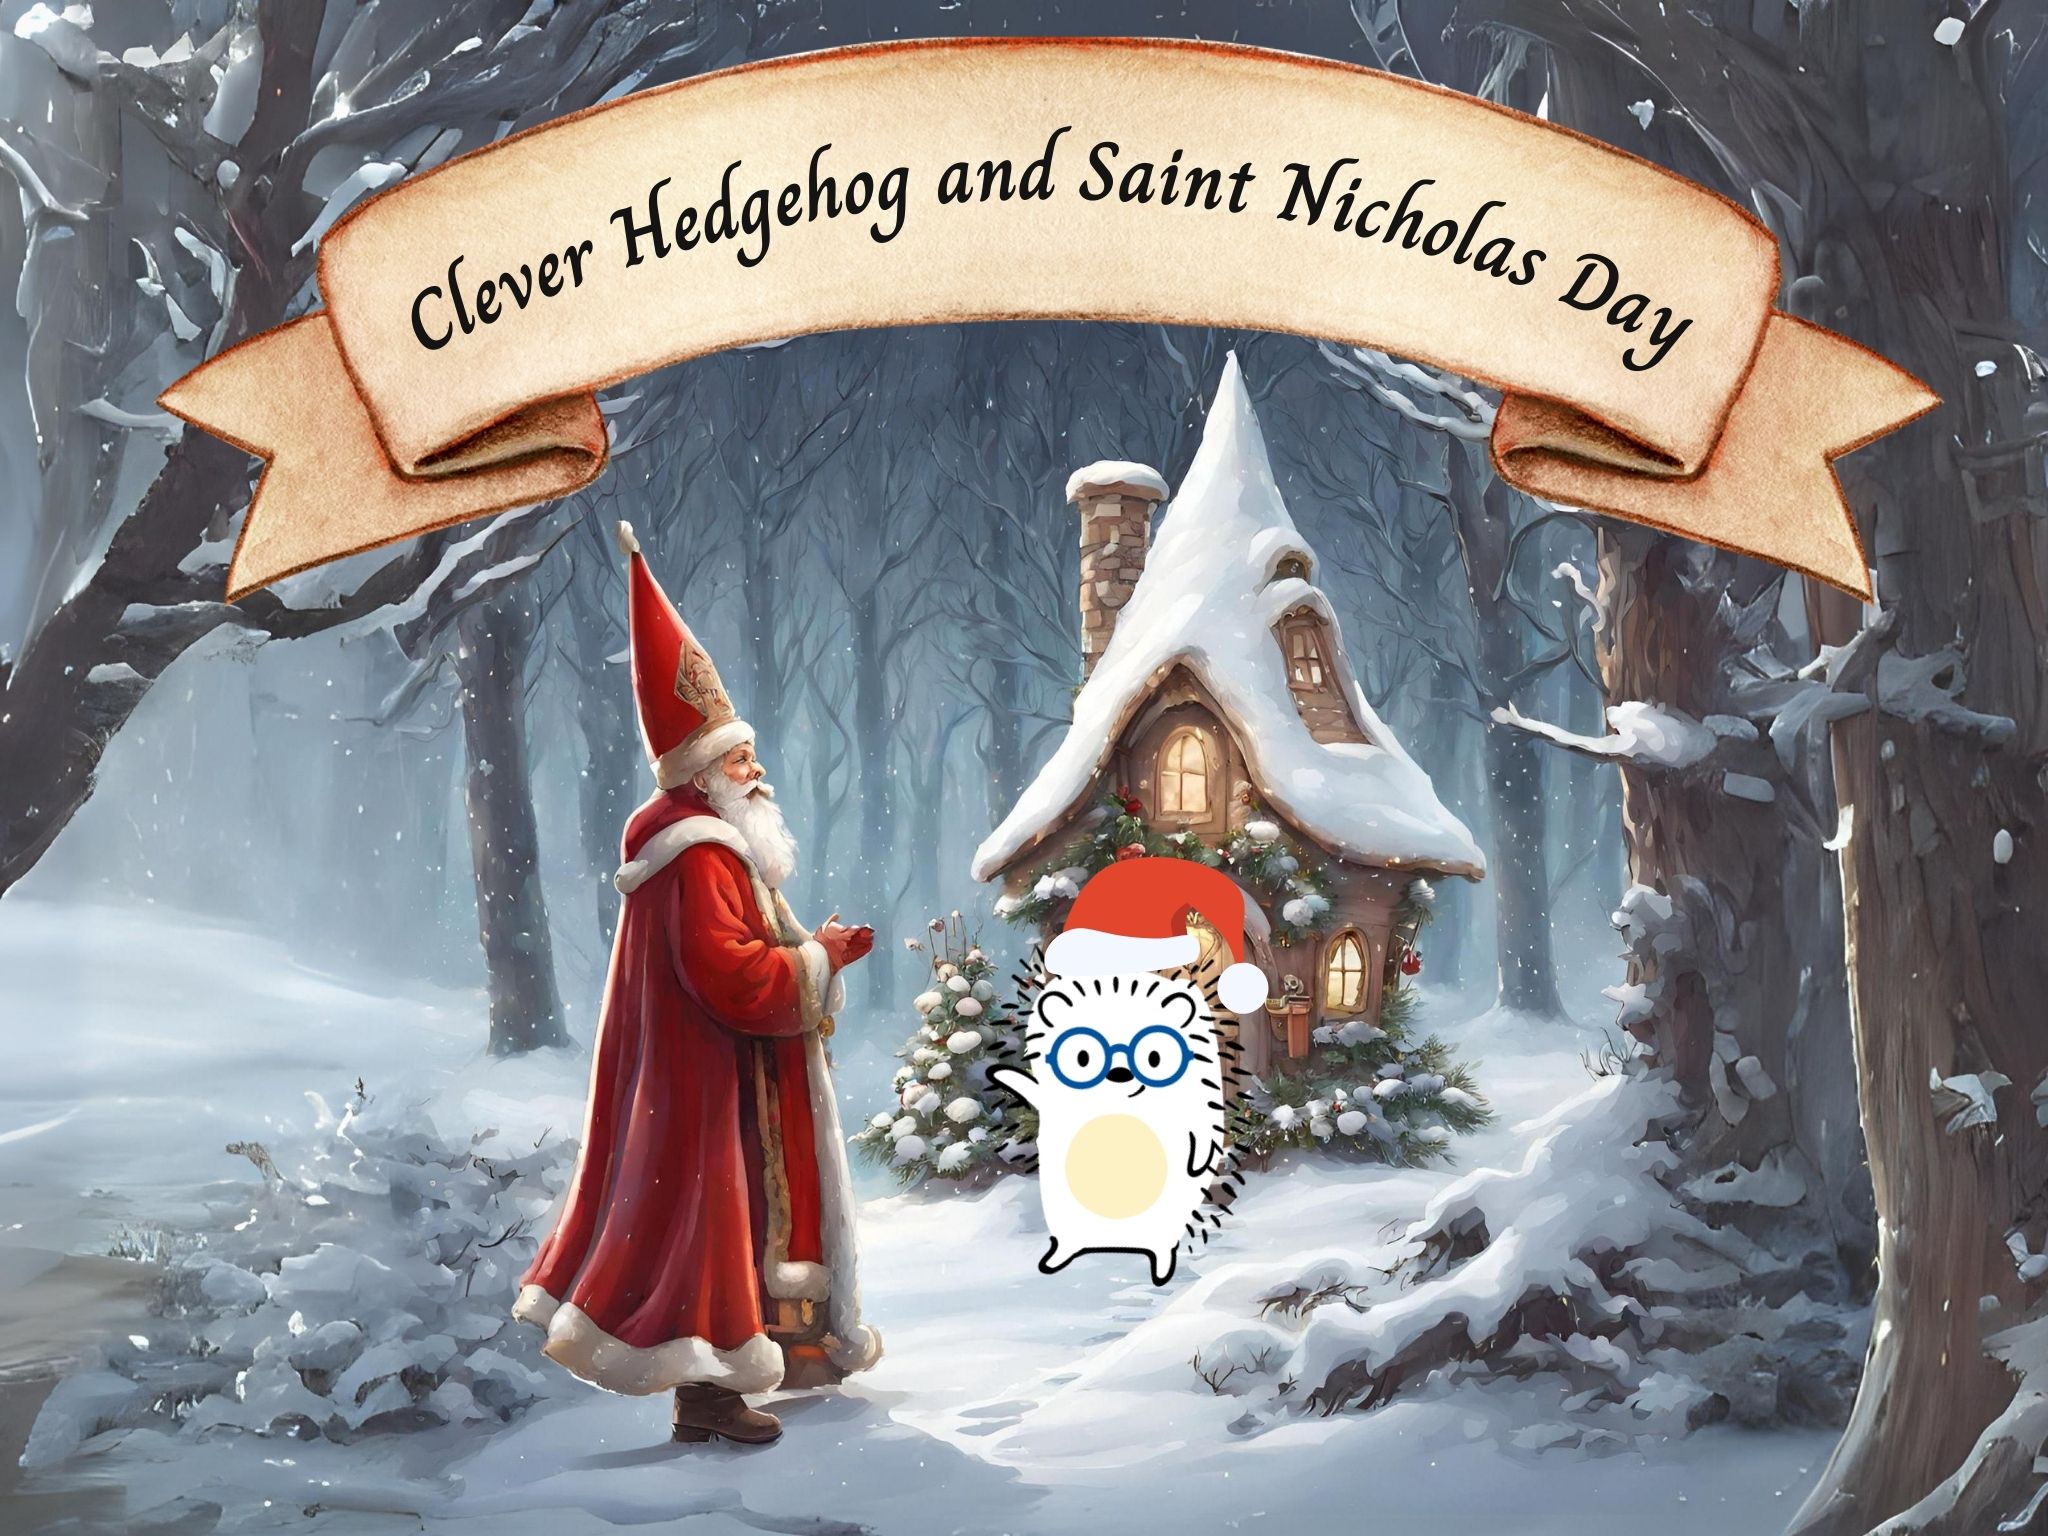 Clever Hedgehog and Saint Nicholas Day story for kids